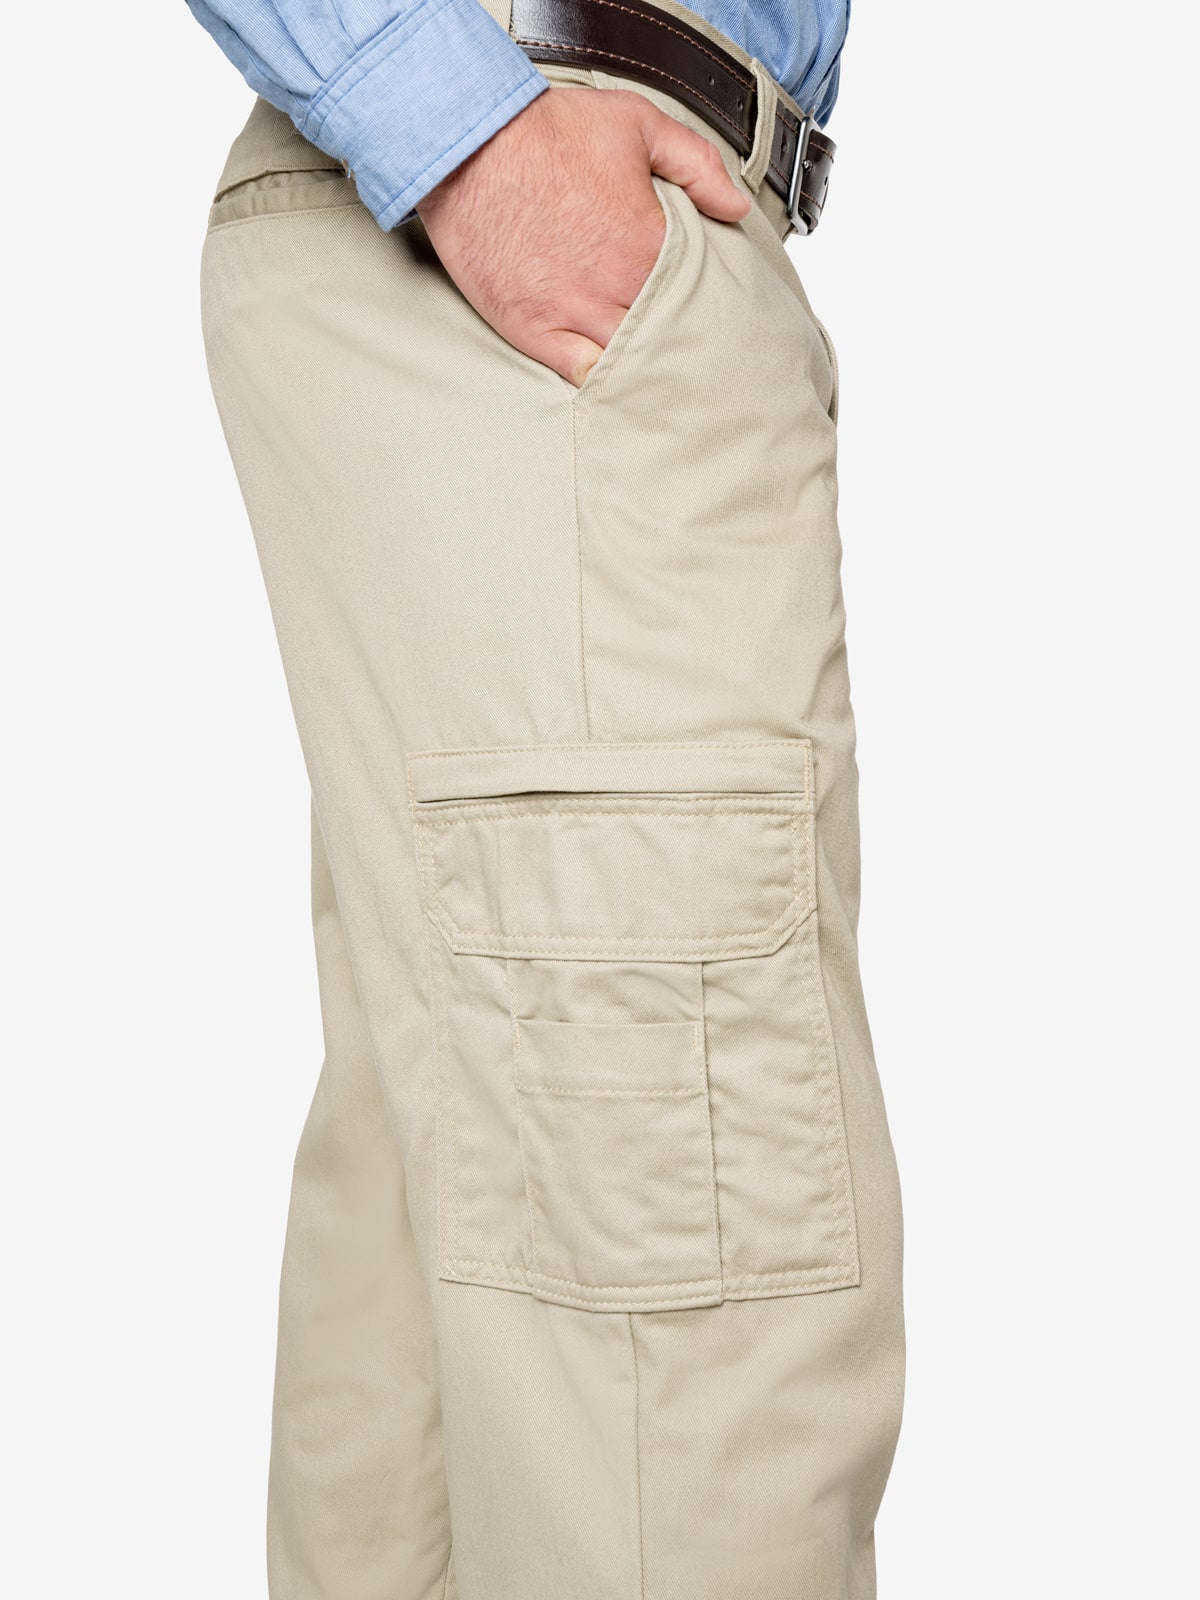 Insect Shield® Men’s Insect Repellent Cargo Pants